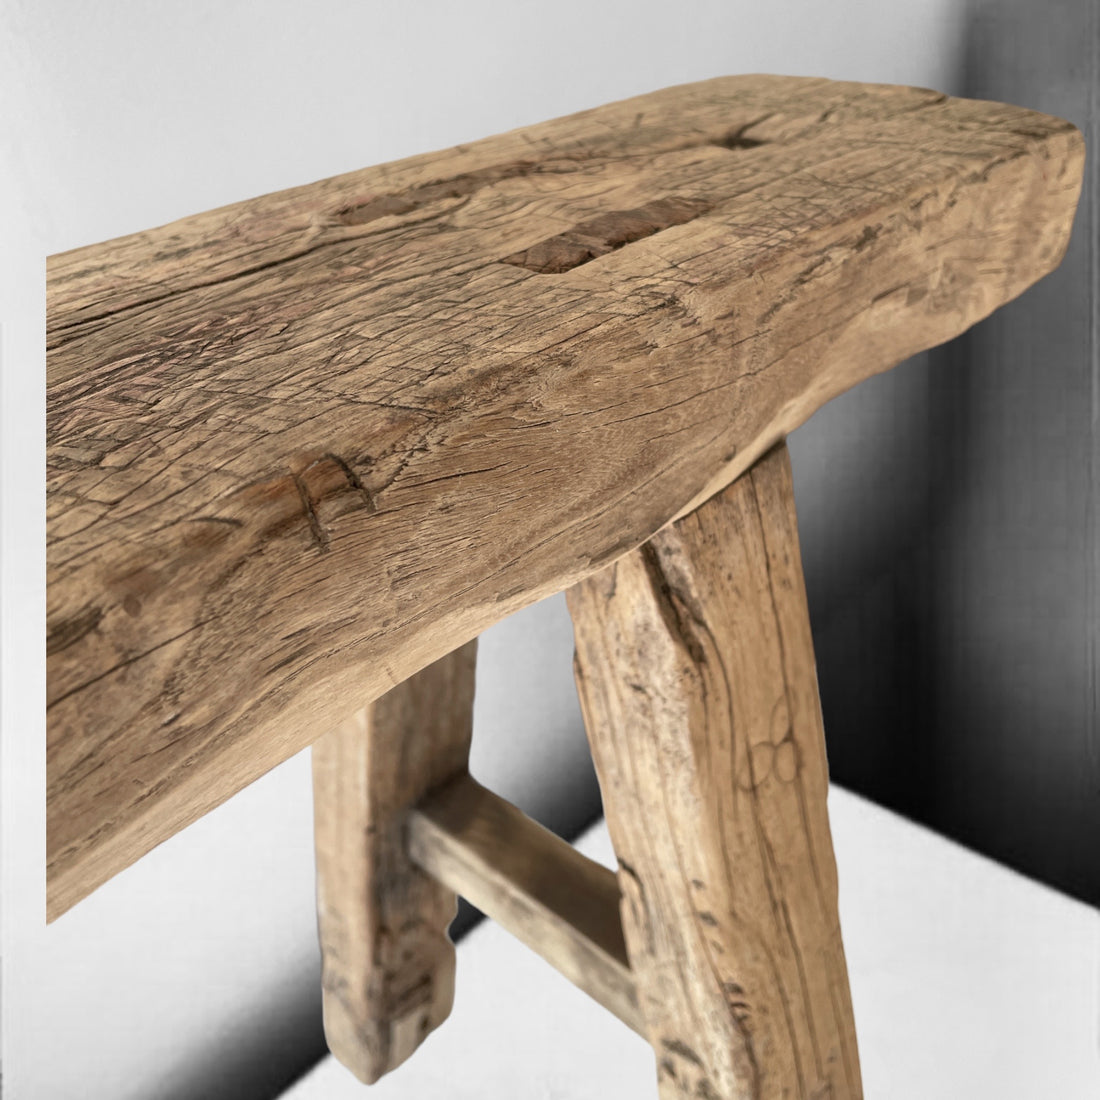 Chinese Elm Wood Bench - eyahomeliving